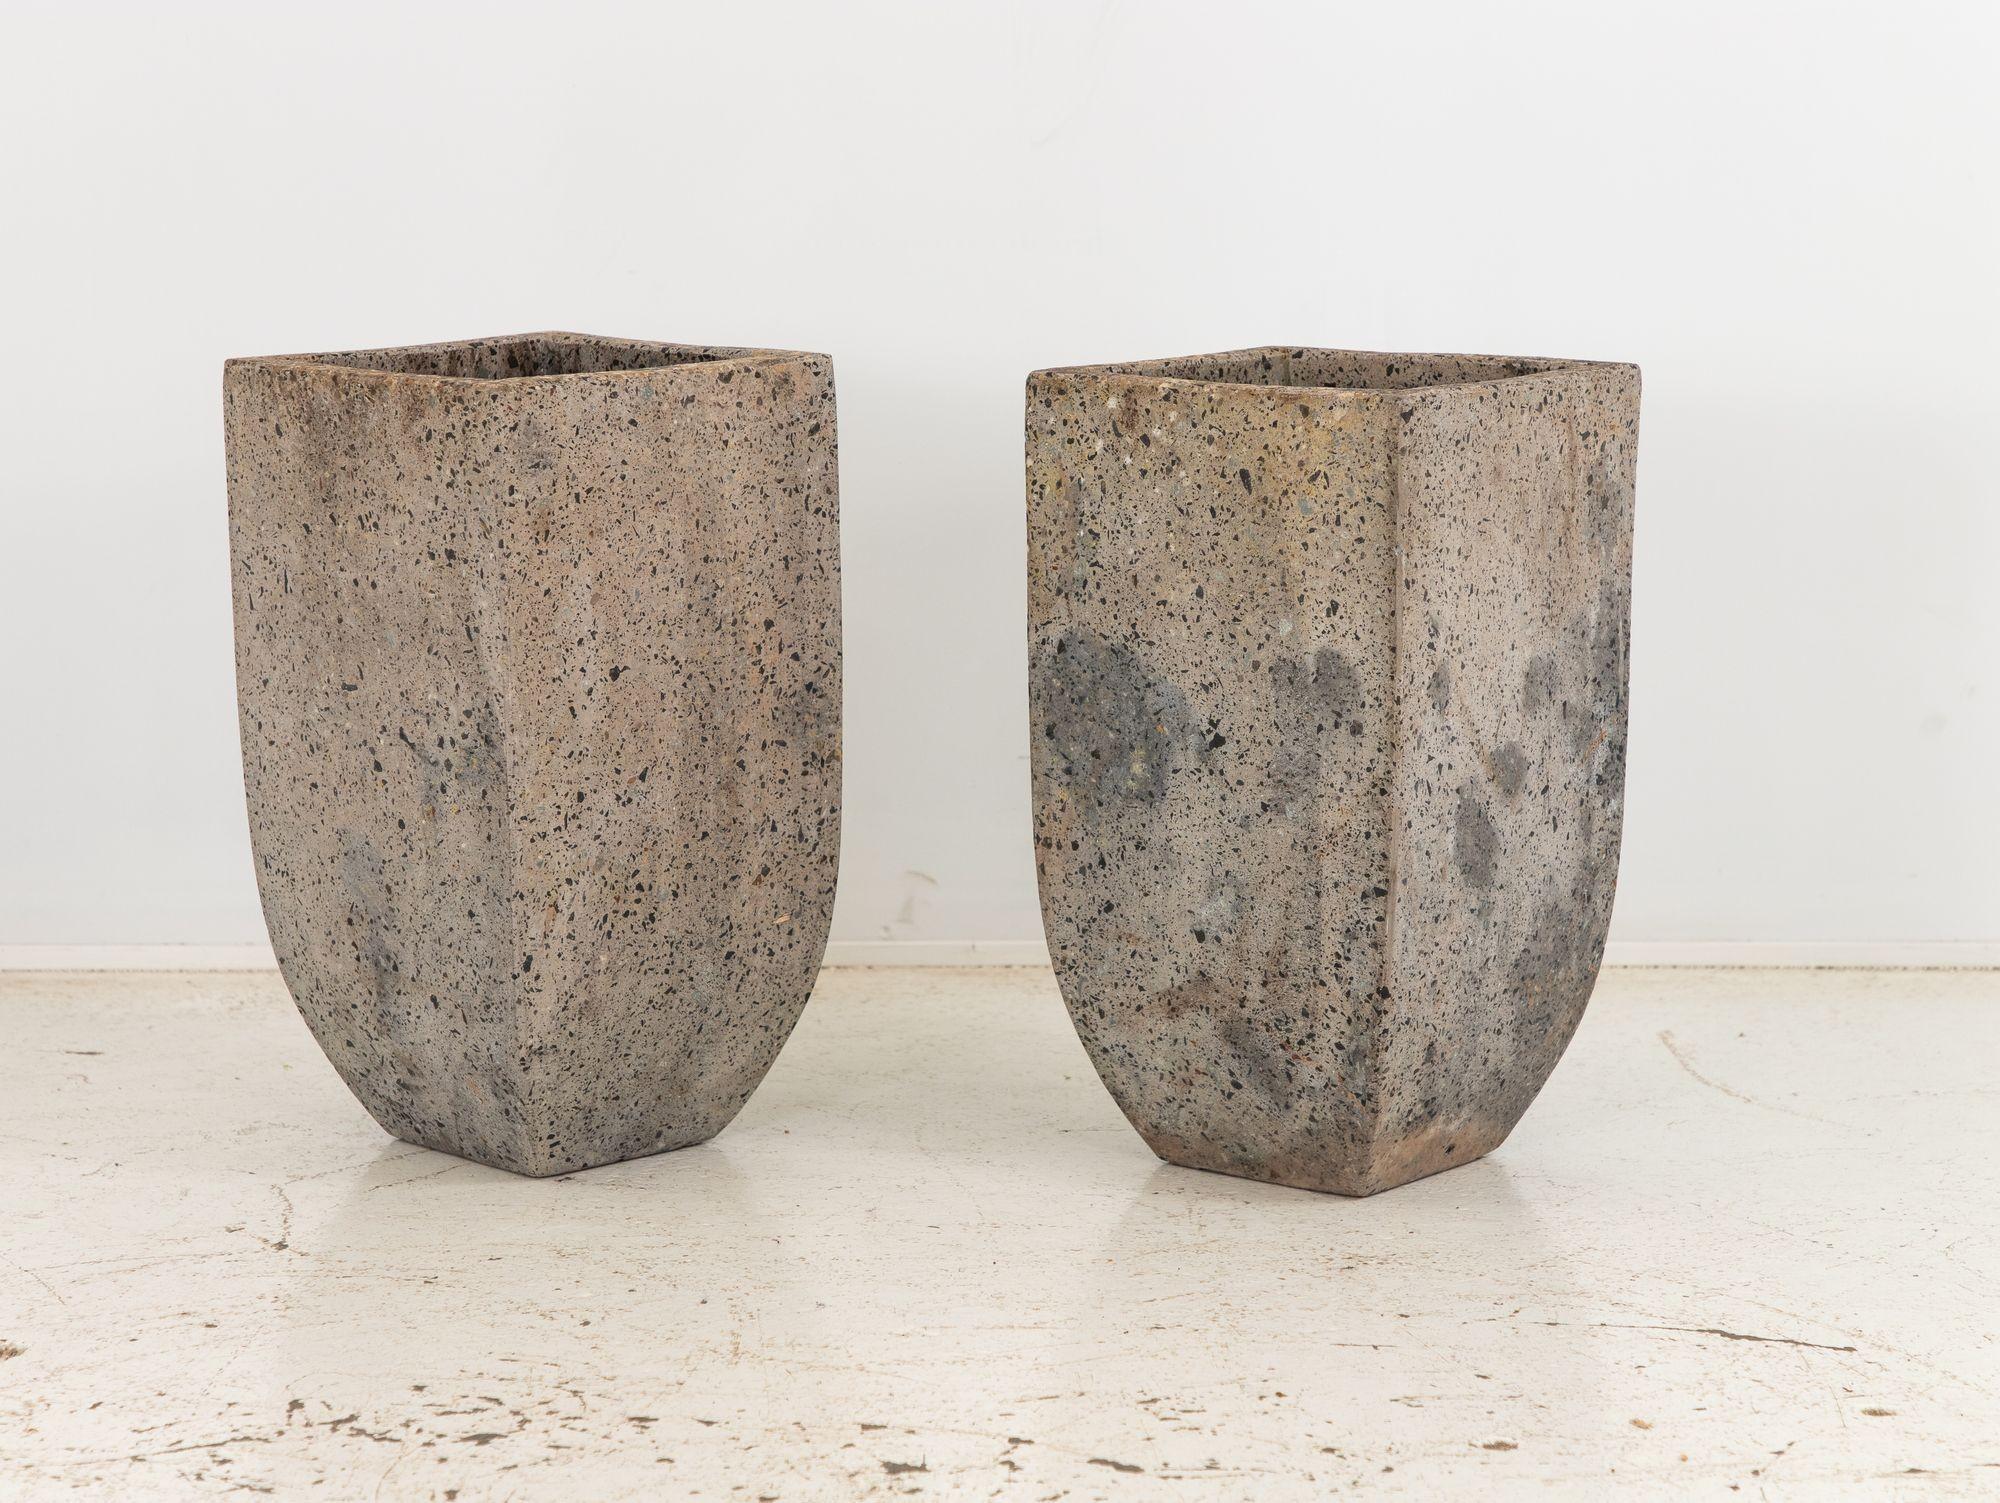 Brutalist Inspired Pair of Mixed Stone Planters, 20th Century In Good Condition For Sale In South Salem, NY